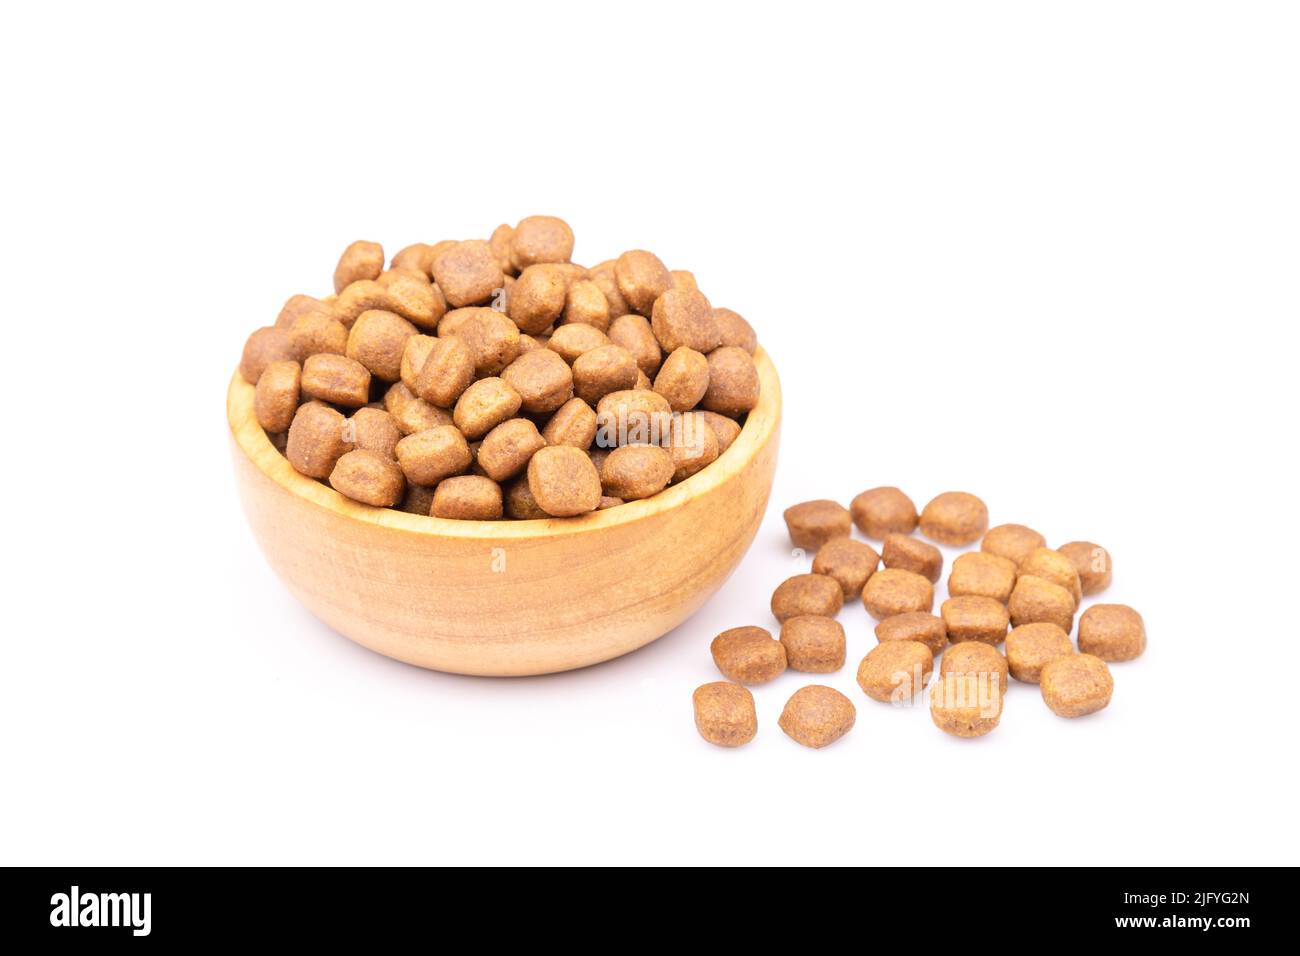 Pile of dog food in wooden bowl isolated on white background Stock Photo